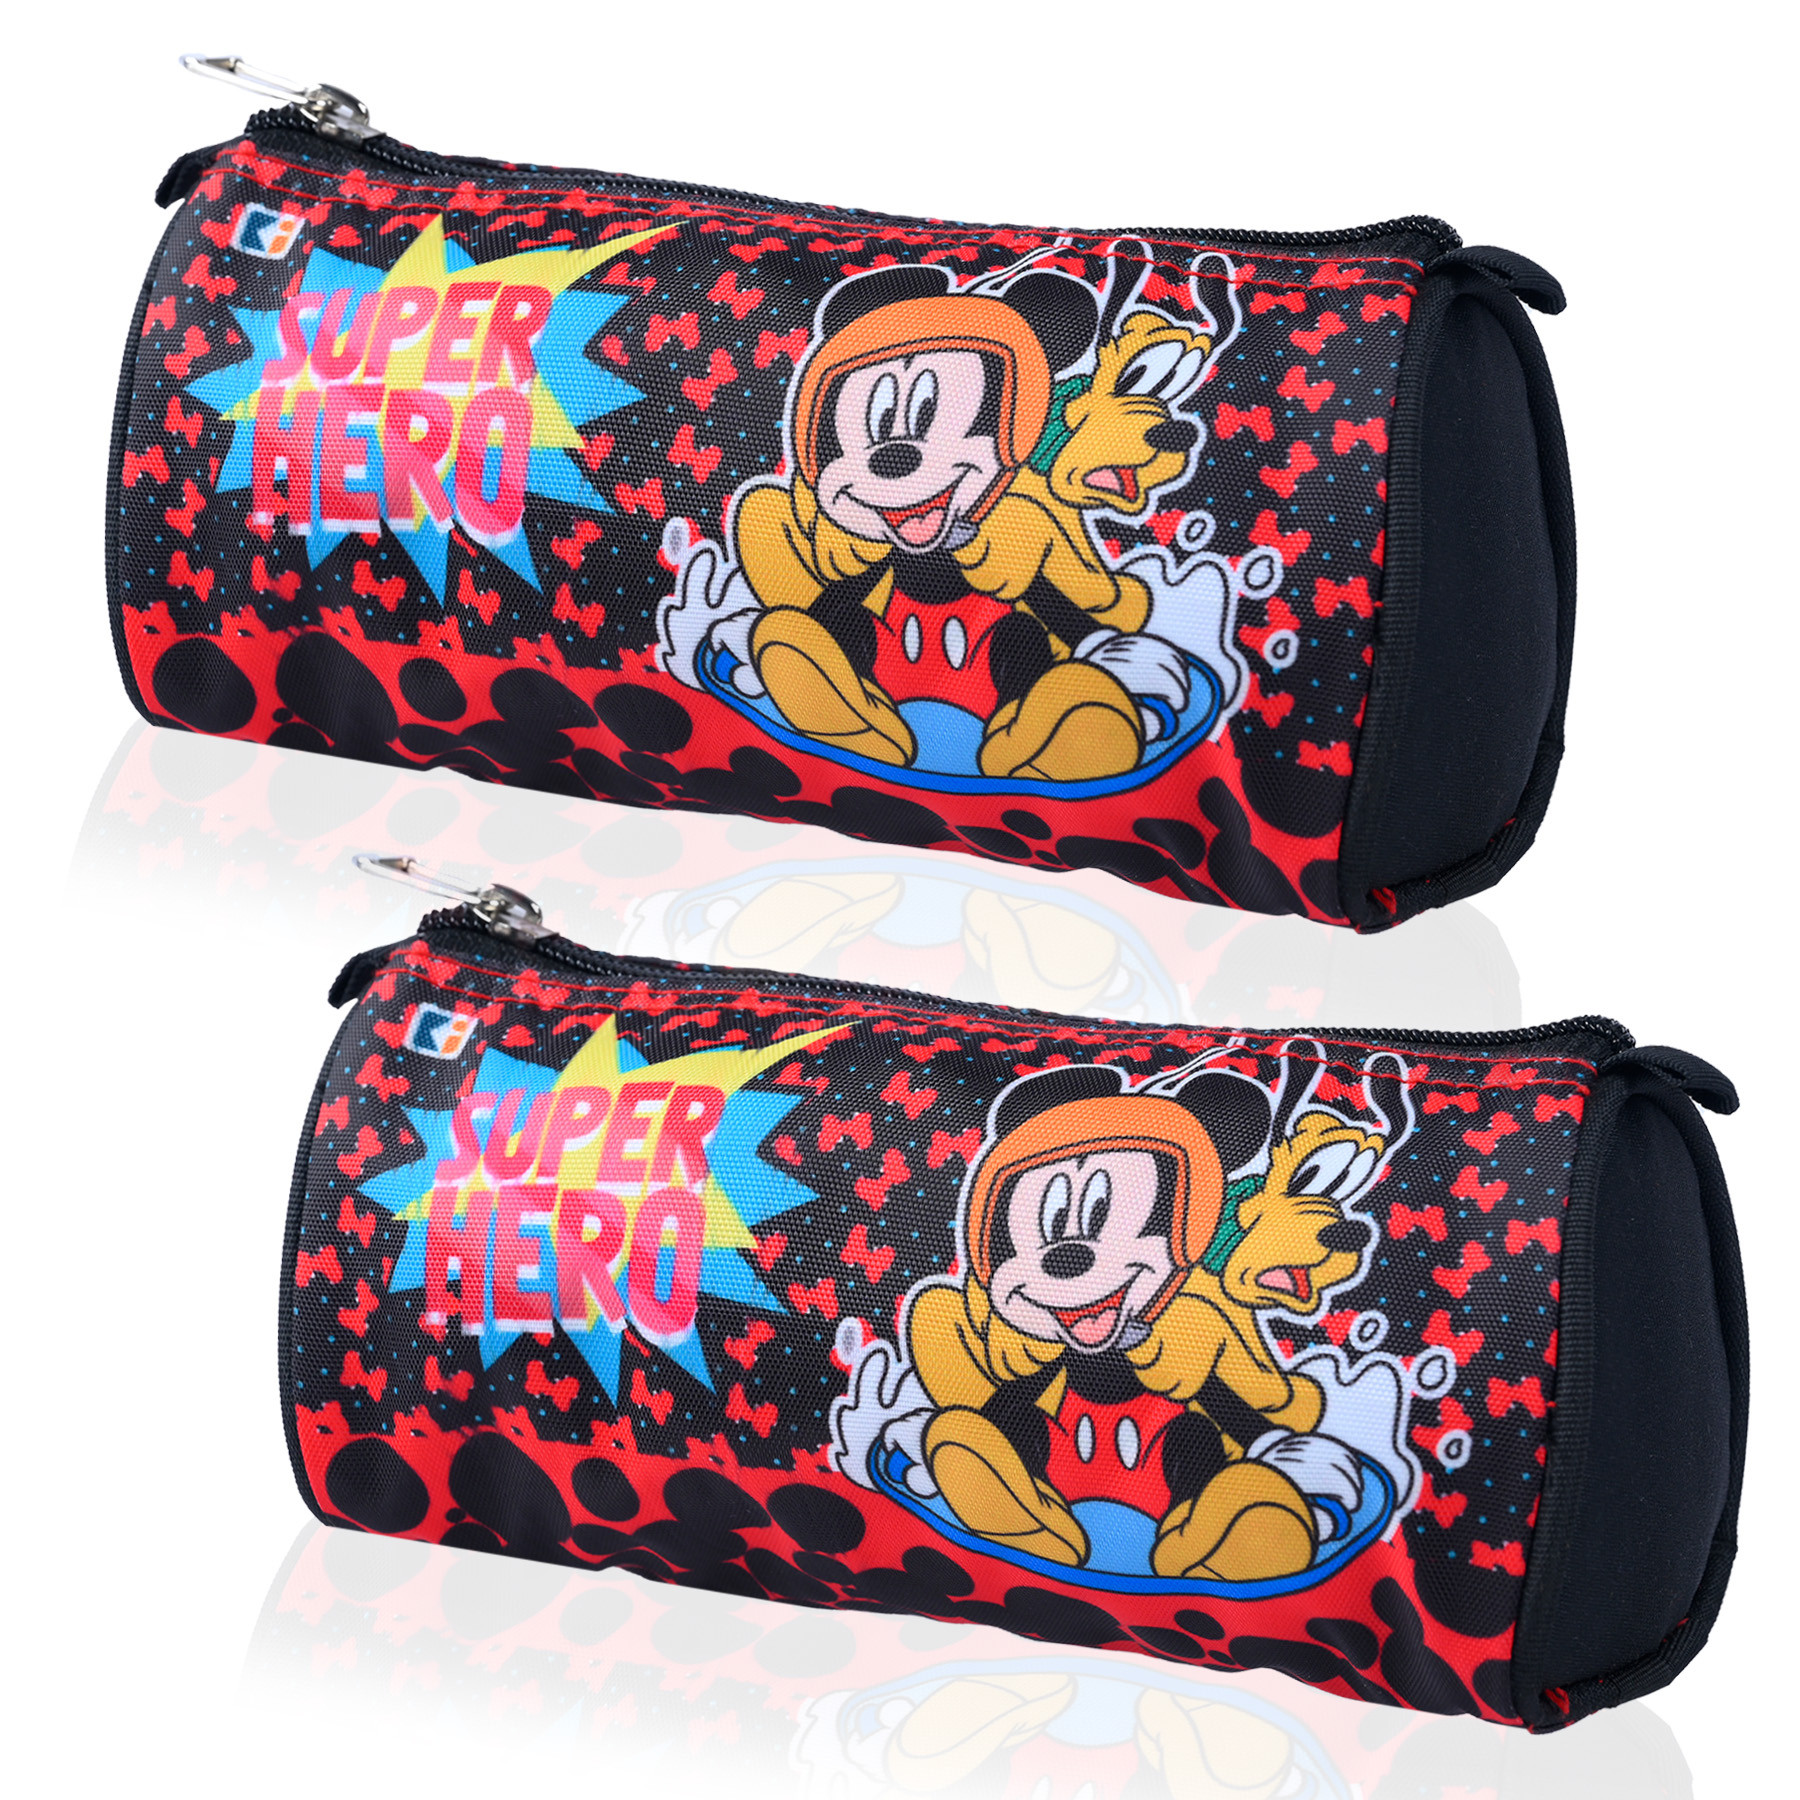 Kuber Industries Pencil Pouch | Multi-Purpose Travel Pouch | Kids Stationary Storage Bag | Pencil Utility School Pouches | Geometry Box | Disney Mickey | Large | Black